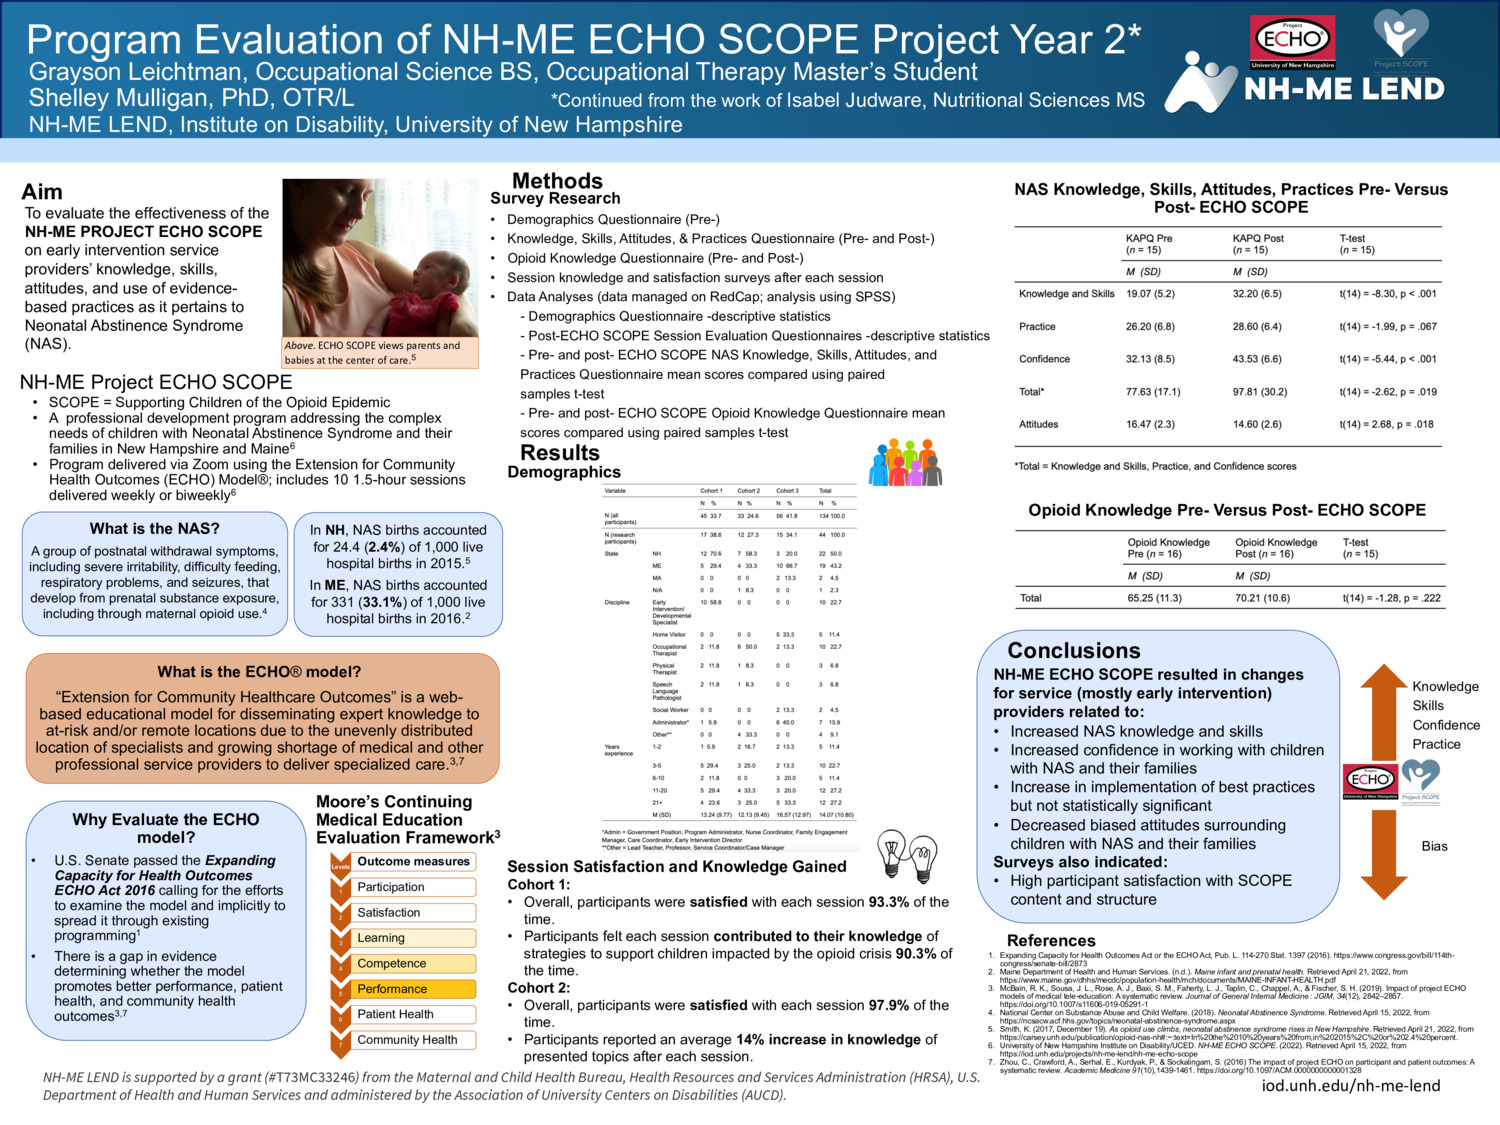 Program Evaluation Of Nh-Me Echo Scope Project Year 2 by gleichtman17